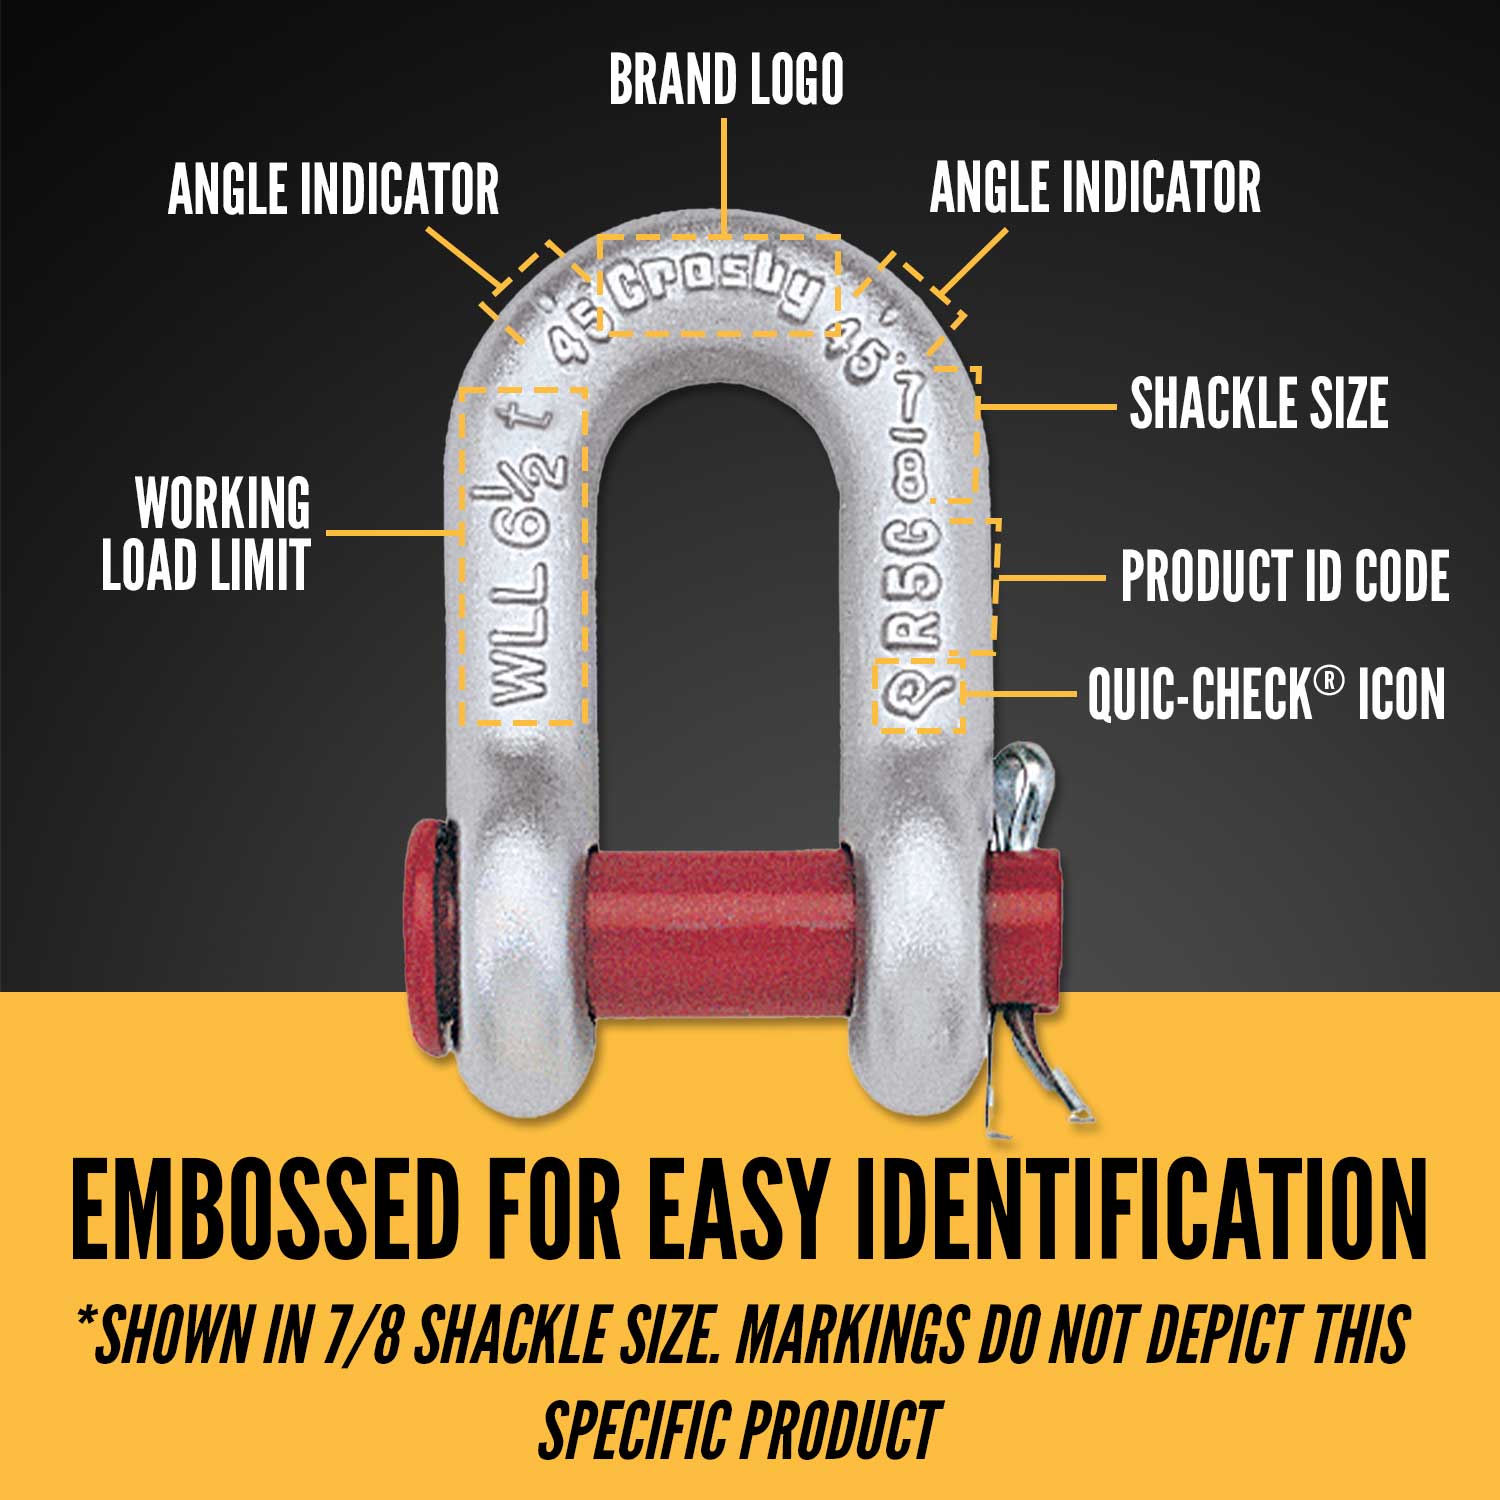 1/2" Crosby® Round Pin Chain Shackle | G-215 - 2 Ton embossed for easy identification